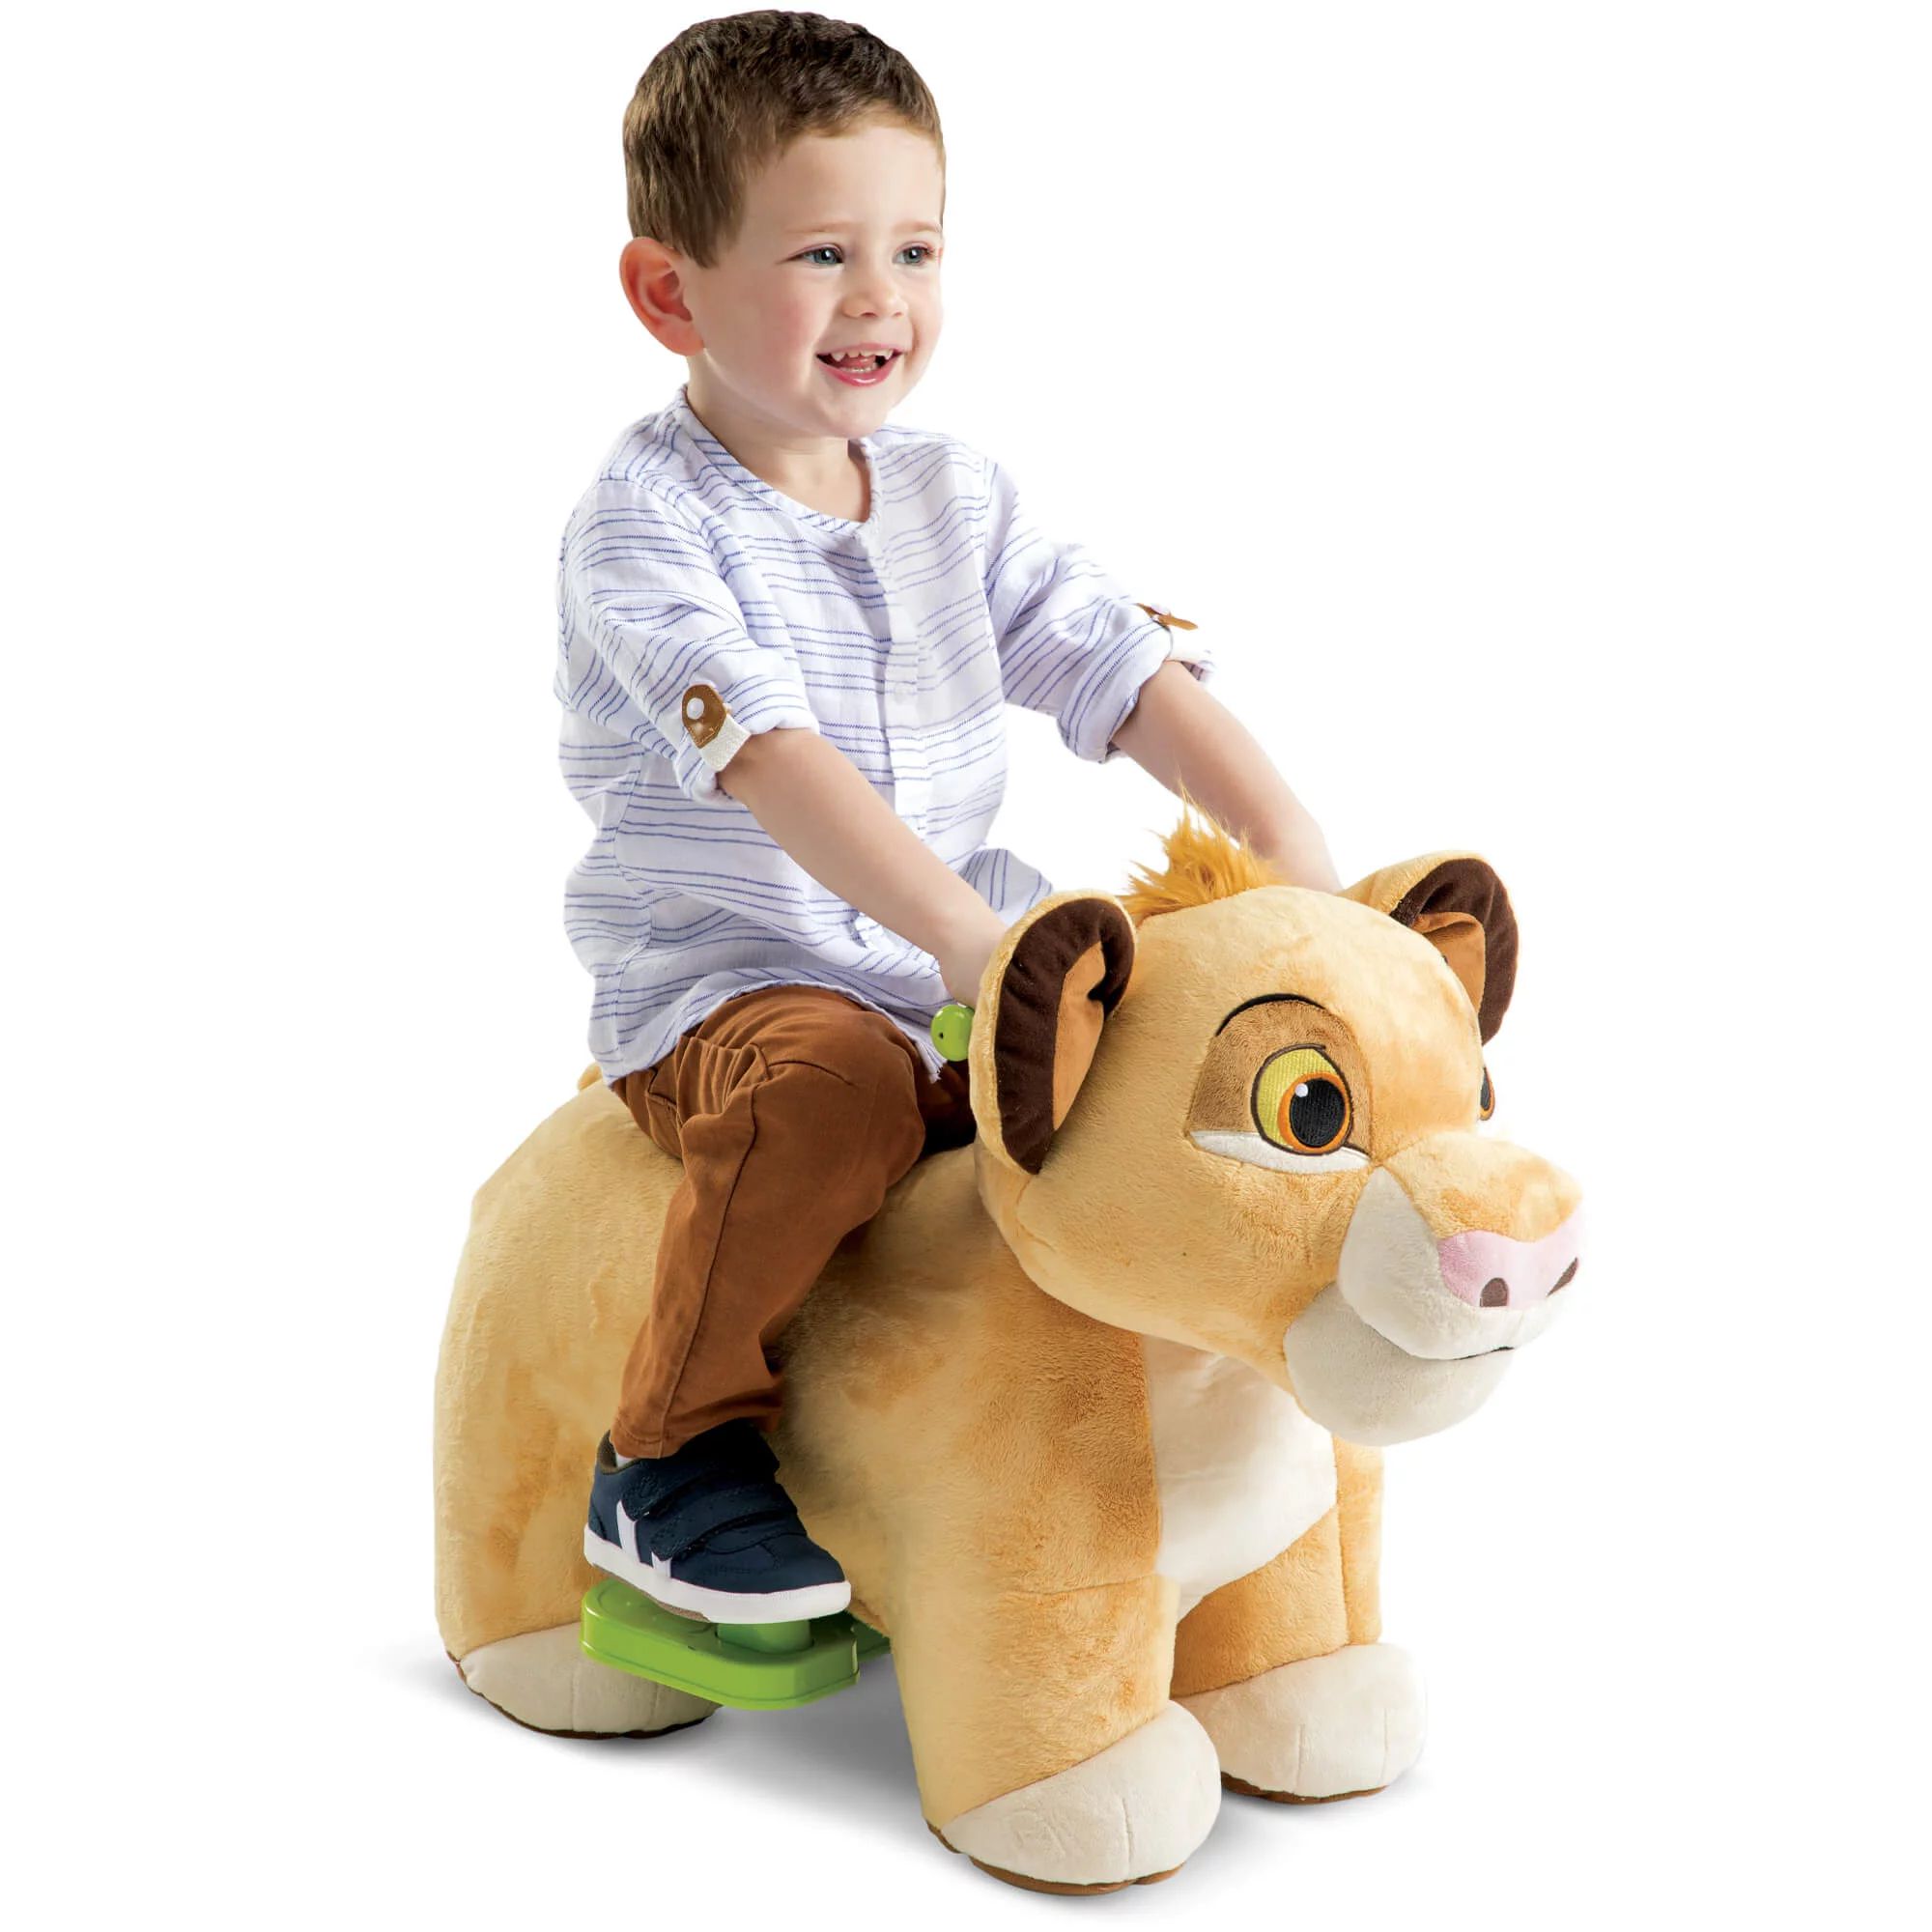 Disney Lion King Simba 6V Plush Ride-On Toy for Toddlers by Huffy | Walmart (US)